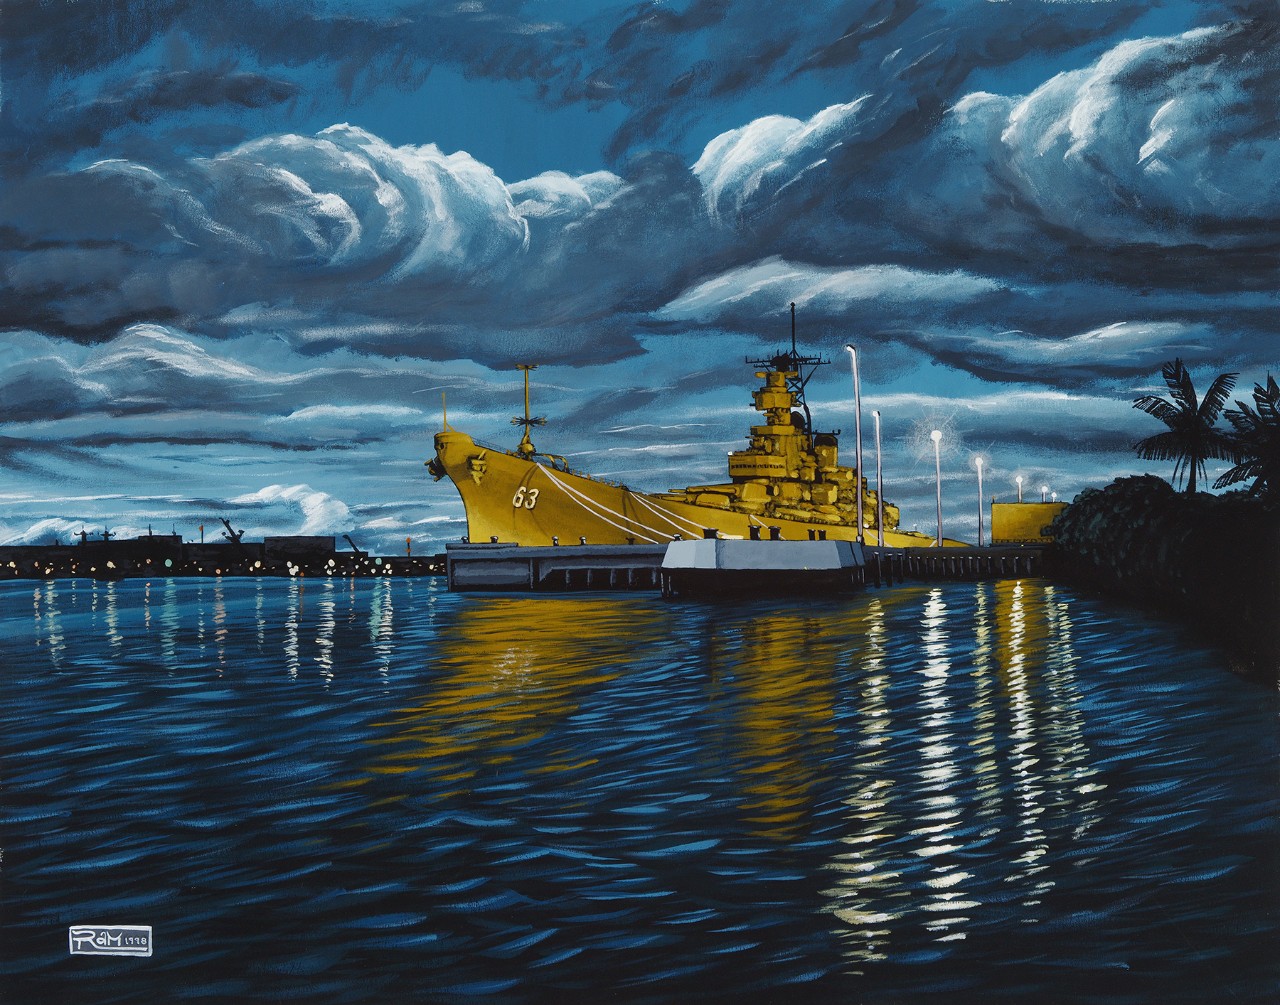 Painting of “The Mighty Missouri